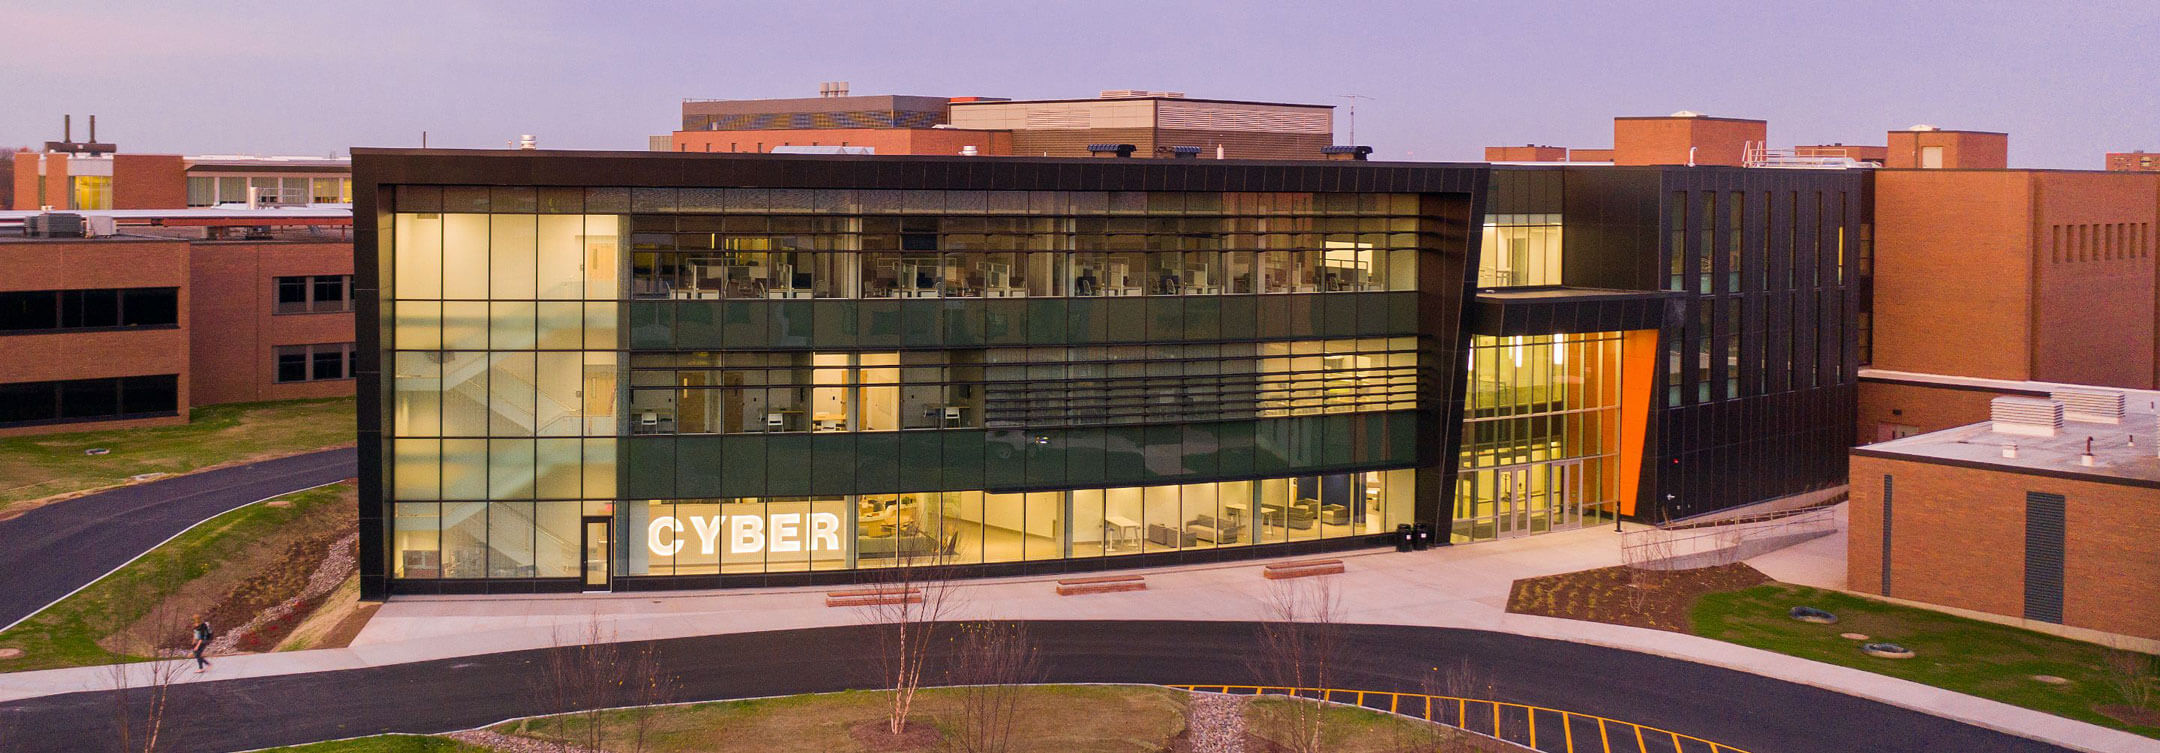 The exterior of the Global Cybersecurity Institute at R I T.